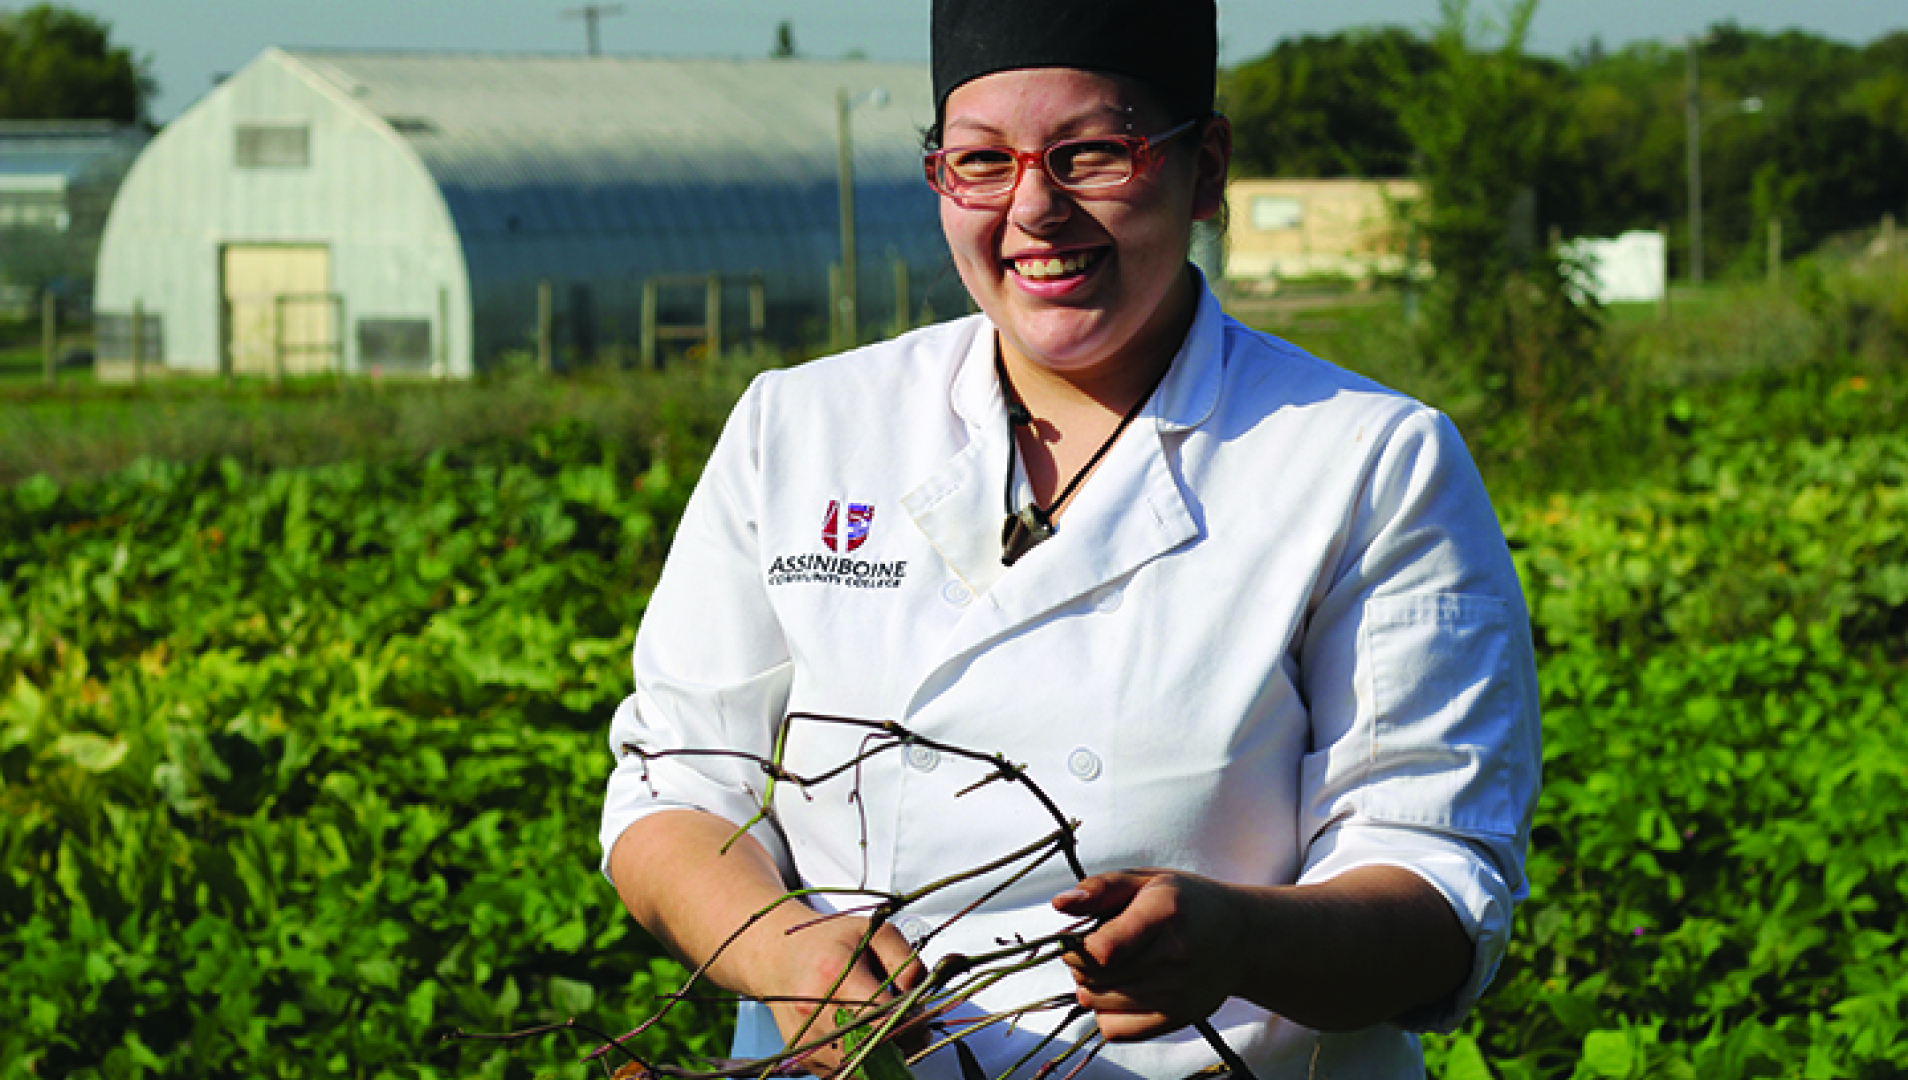 A student in a culinary uniform stands in the foreground of the photo before a field behind her. 